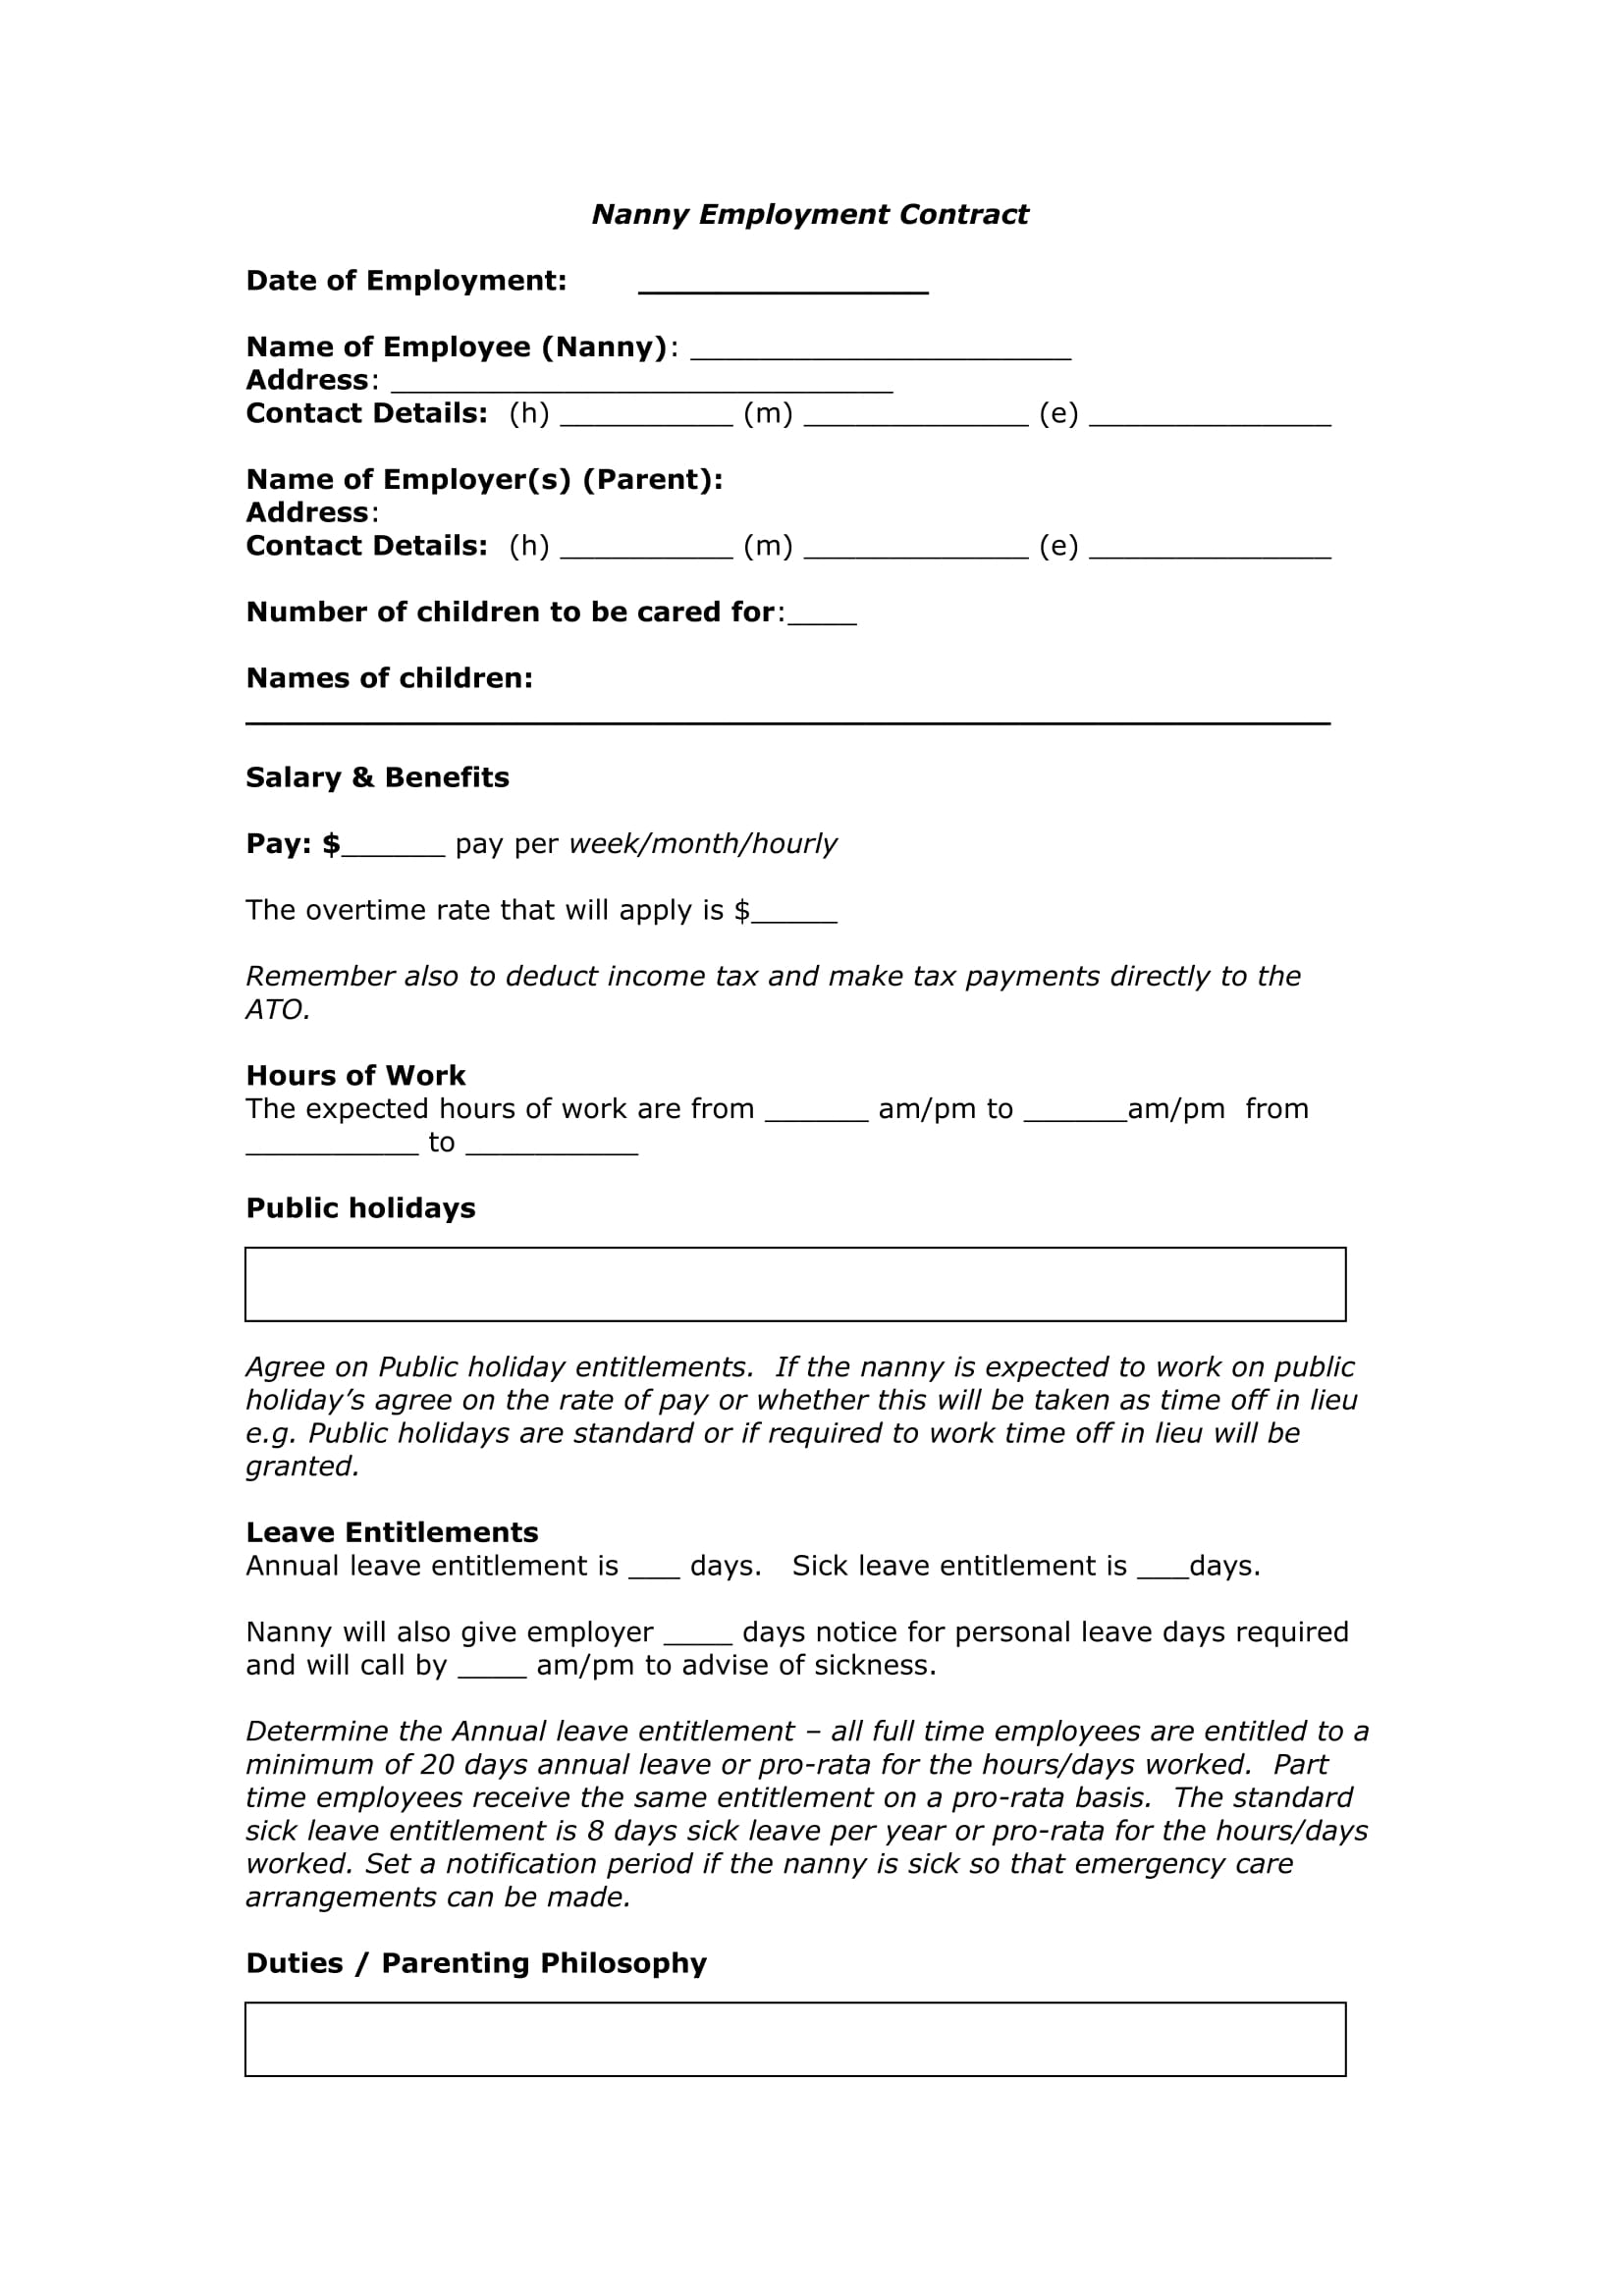 nanny employment contract example